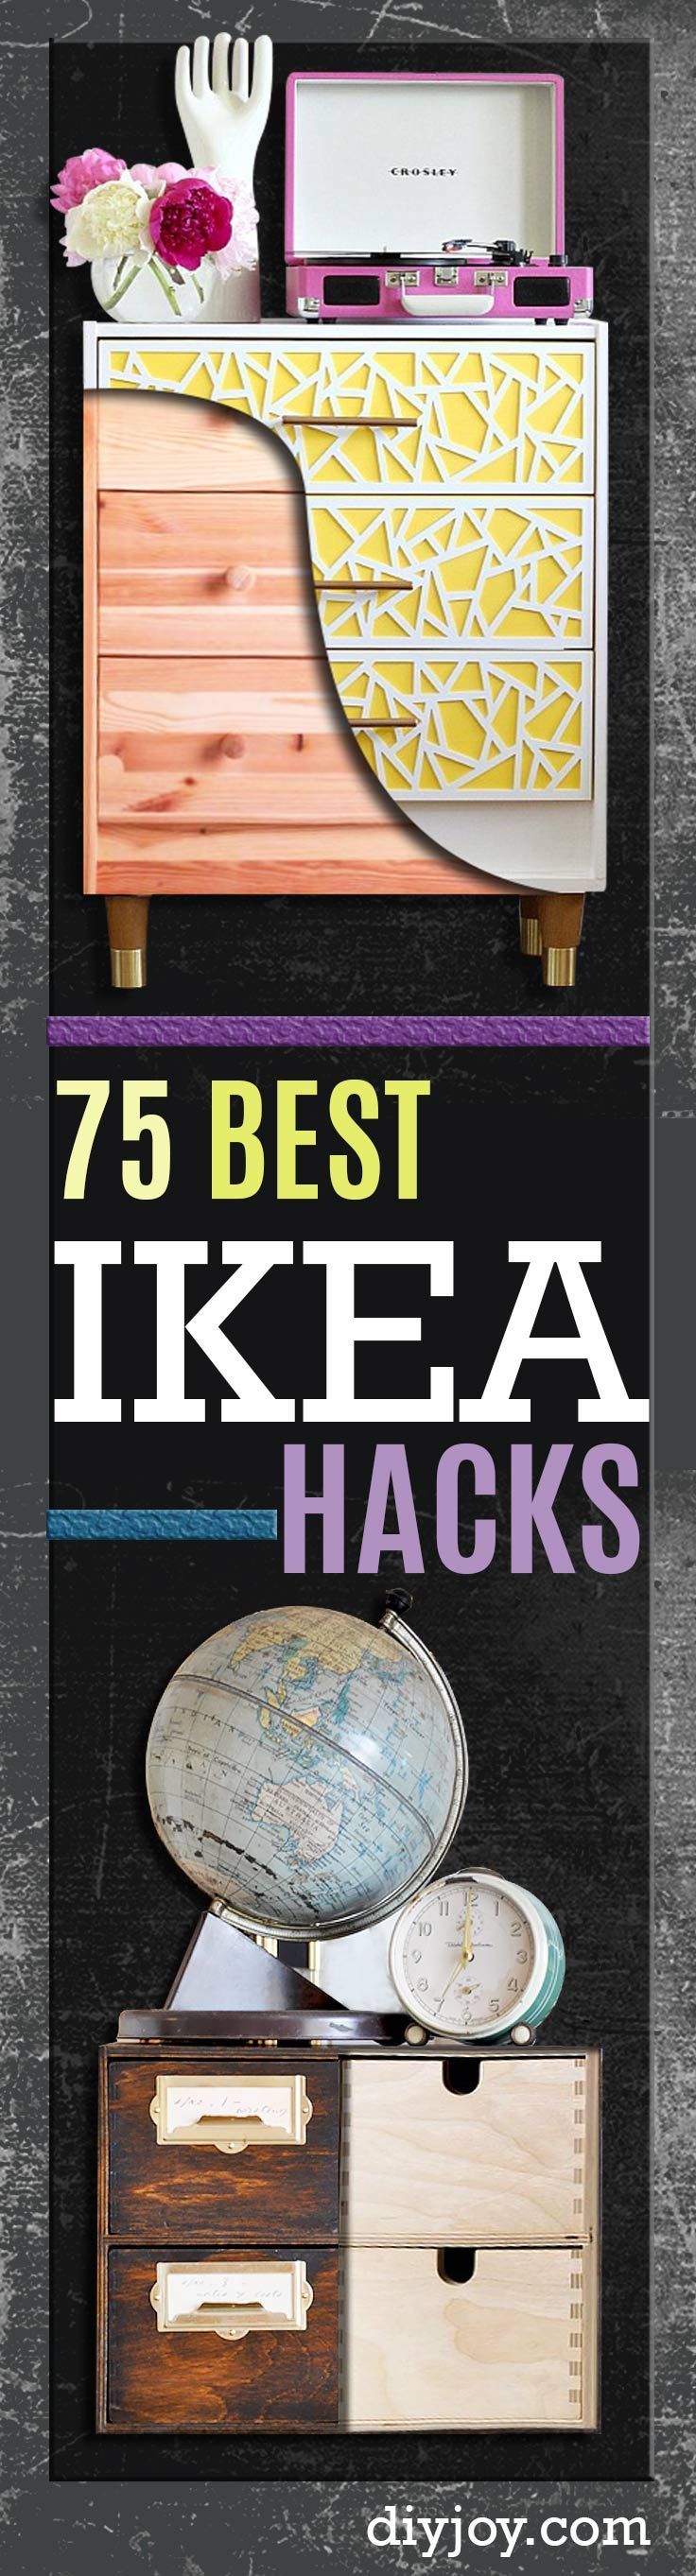 IKEA Hacks and DIY Hack Ideas for Furniture Projects and Home Decor from IKEA - ...